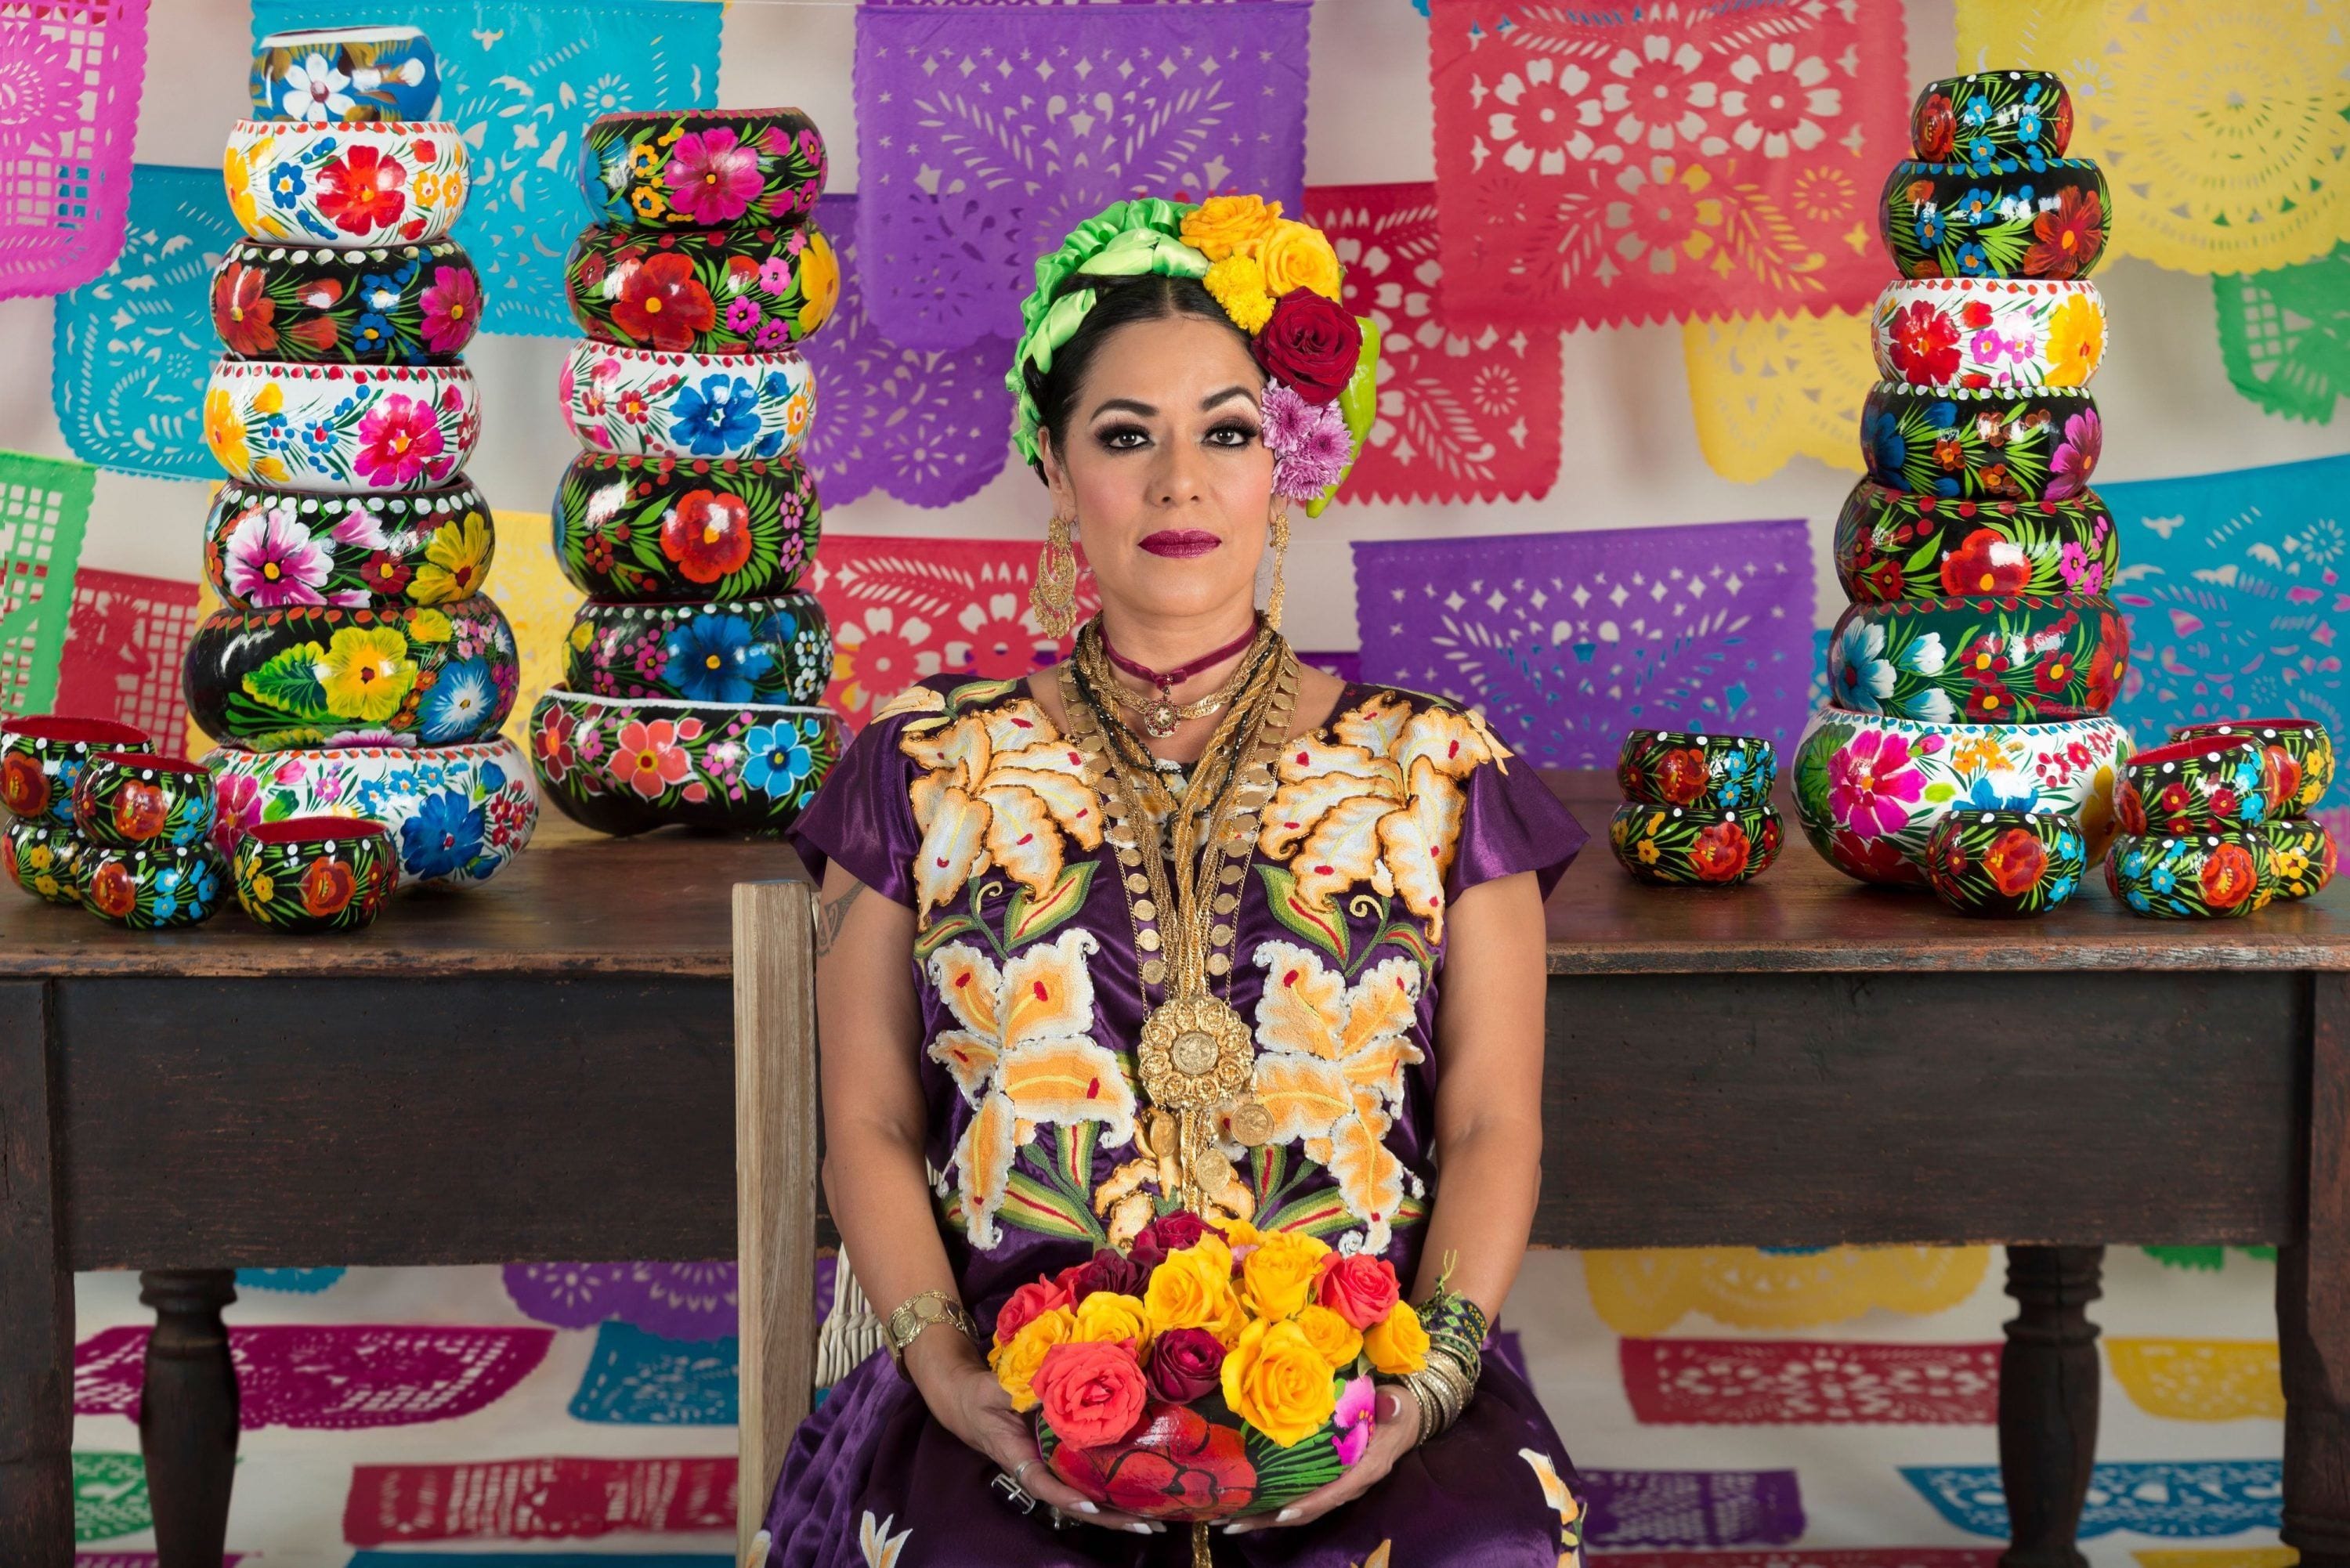 Lila Downs Goes for Party Music Not Partisan Songs